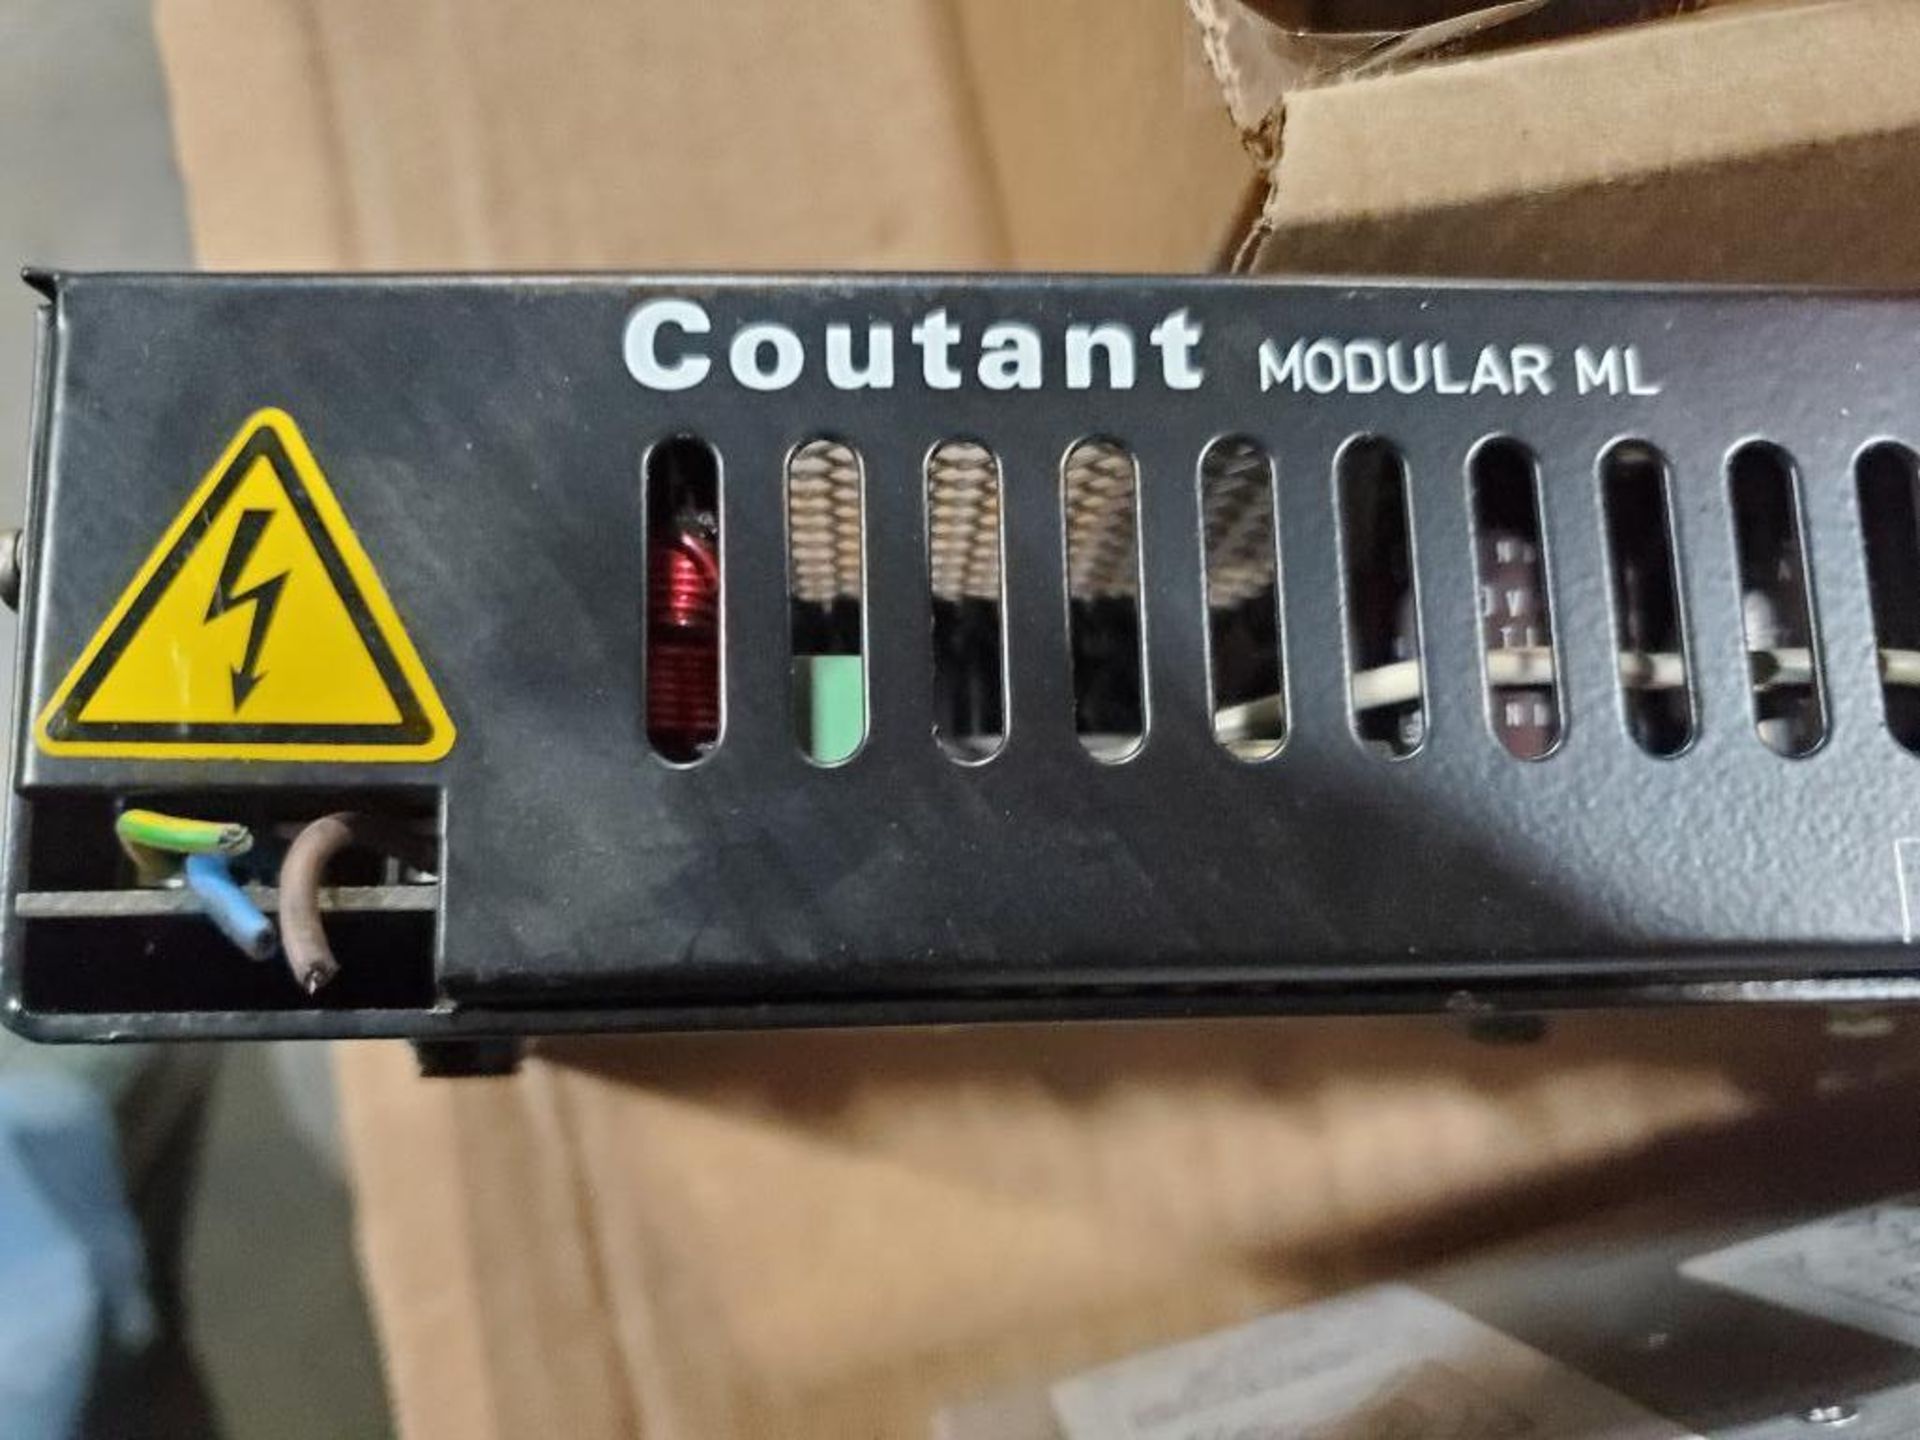 Qty 2 - Power supplies. Deltron Model CV360A04 and Coutant model ML-130-B3. - Image 2 of 8